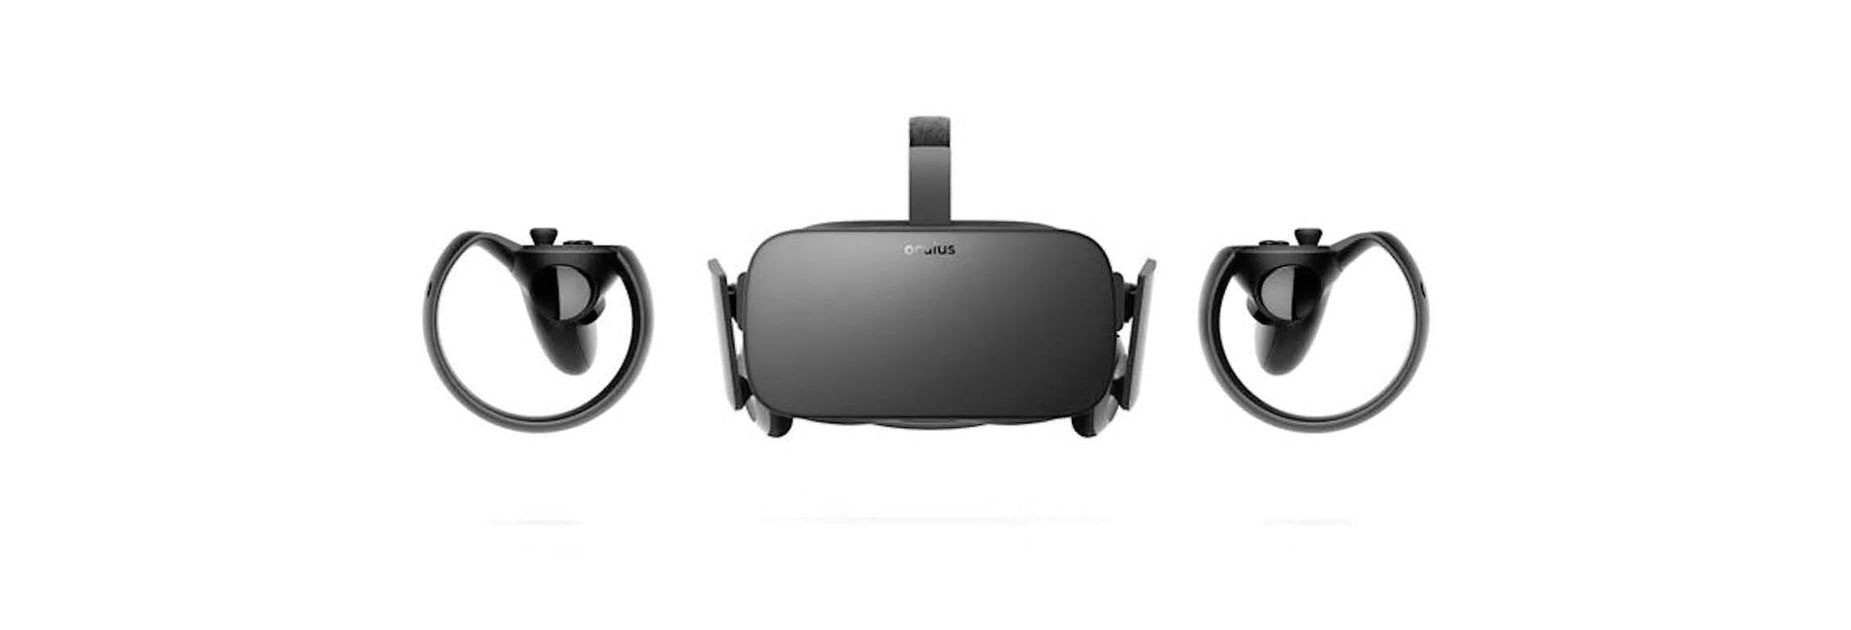 Oculus Rift VR Devices | VR Devices | Knoxlabs